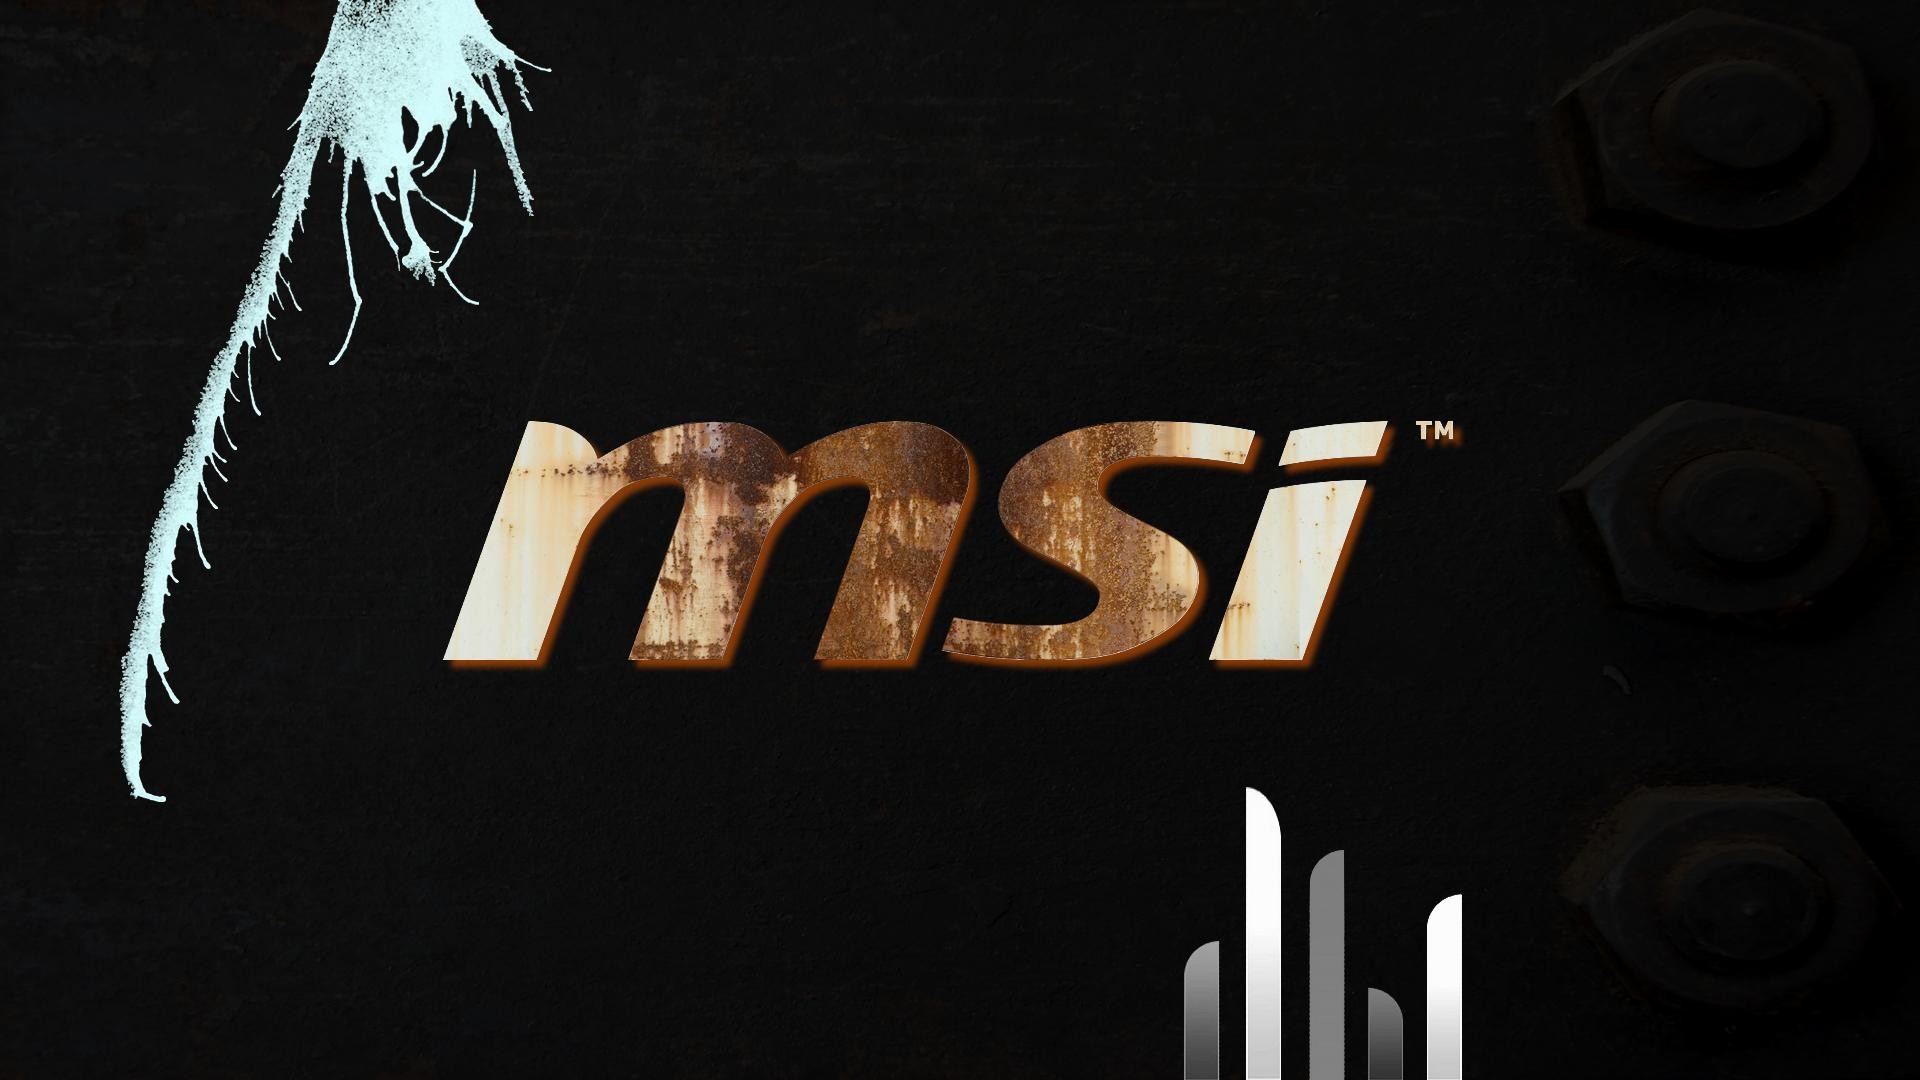 wallpaper.wiki-Msi-Text-Background-Download-Free-PIC-